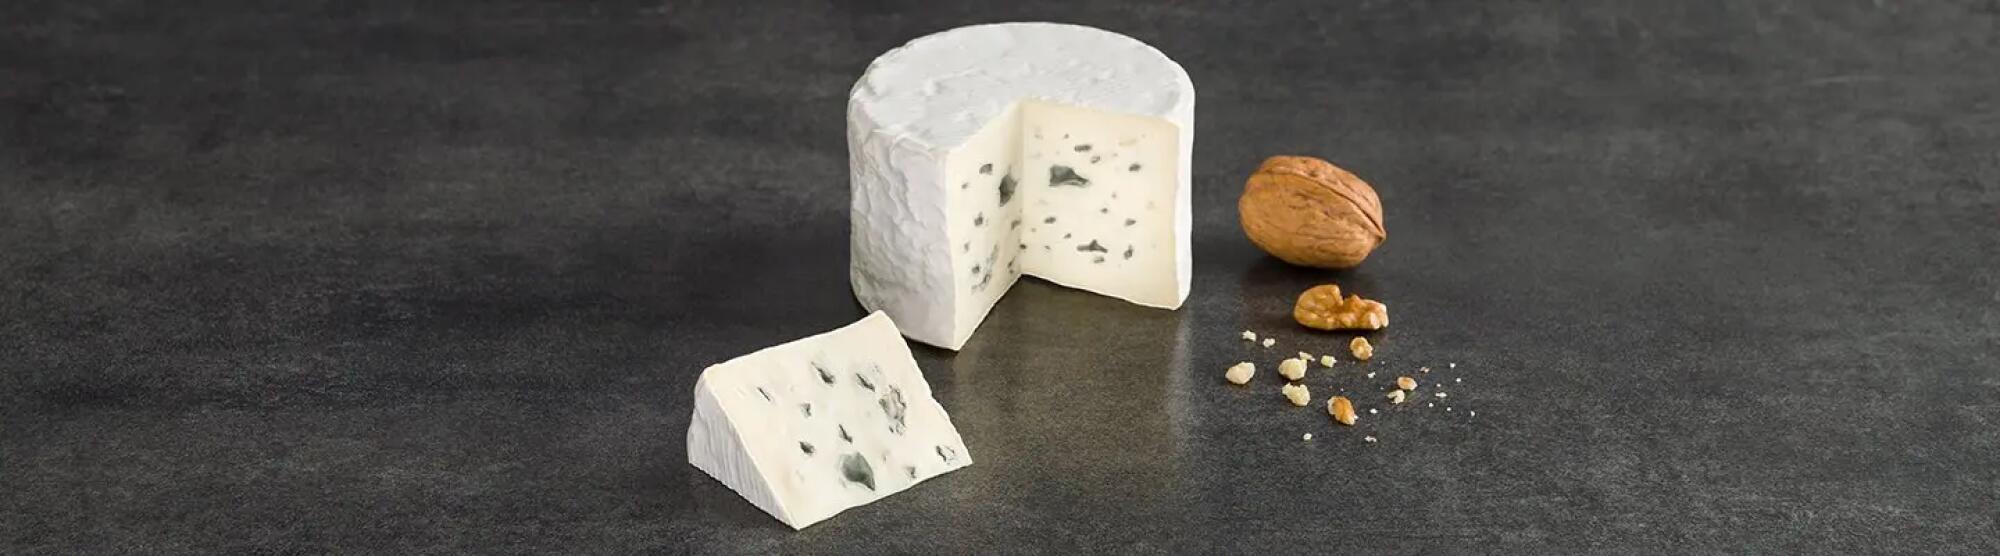 Fromage : Bresse Bleu Double Affinage